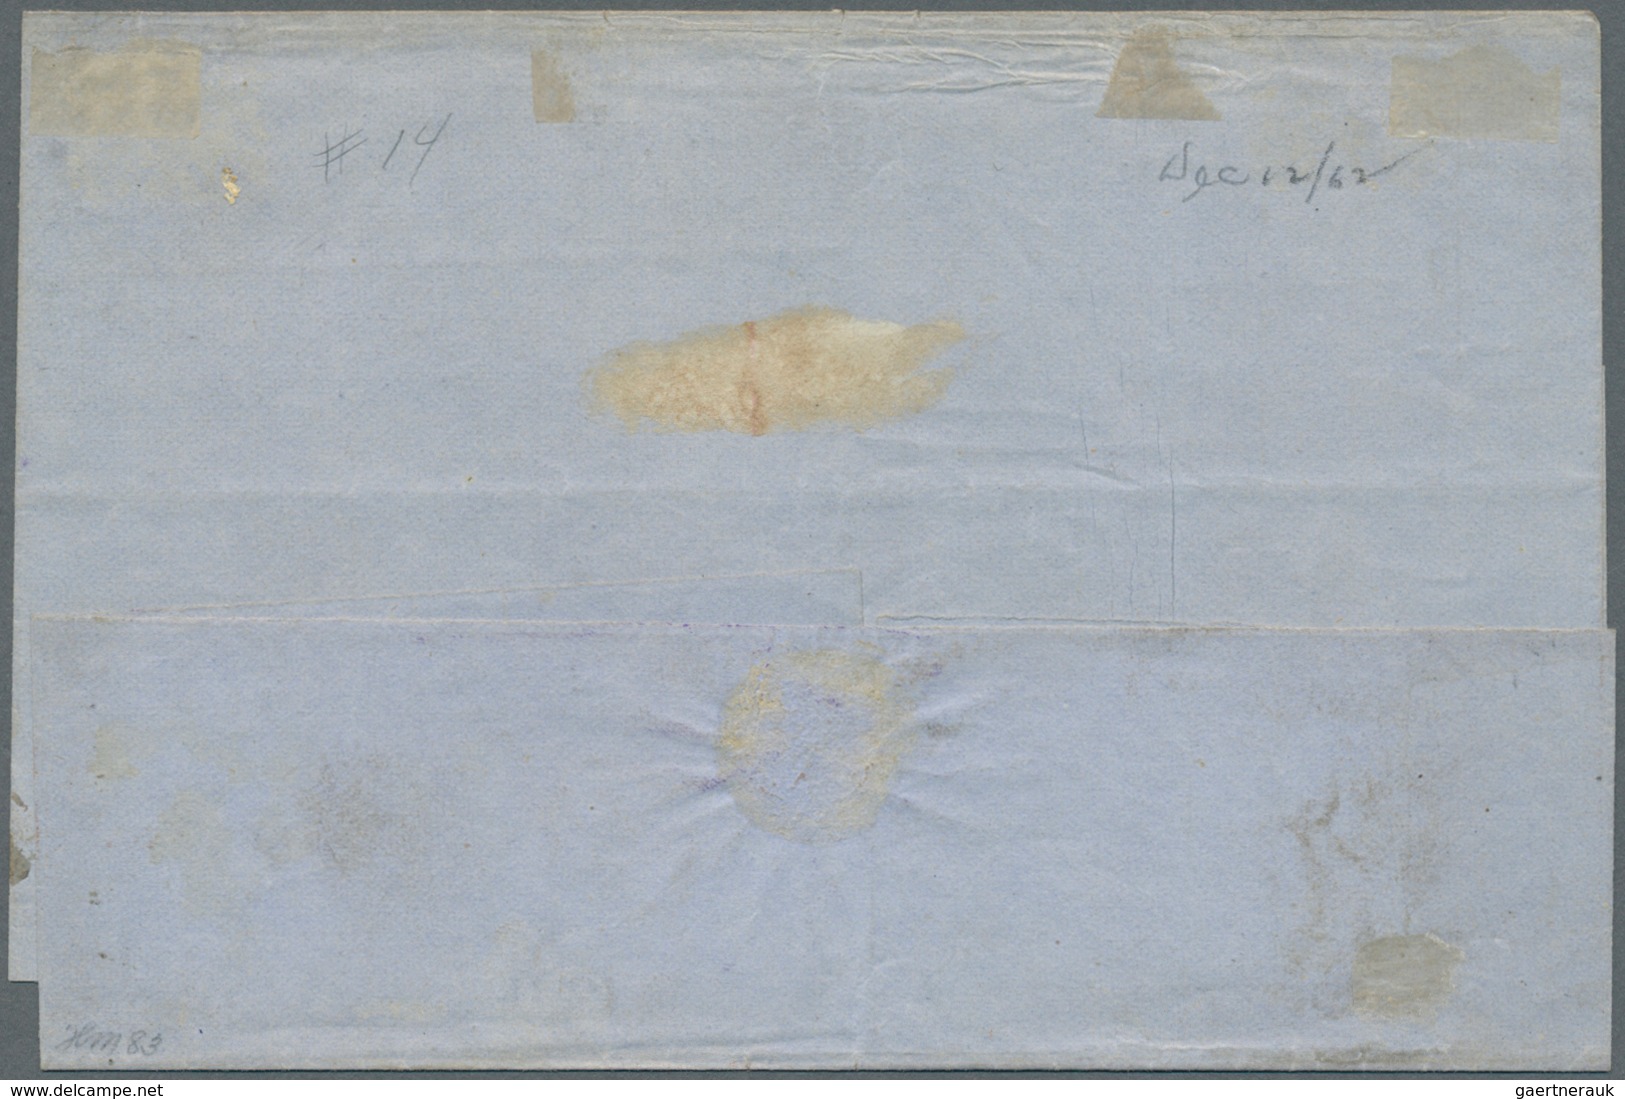 12602 Uruguay: 1859, 80 Centimos Yellwo Sun Inscripted "MONTEVIDEO" On Folded Letter Sheet With Horizontal - Uruguay